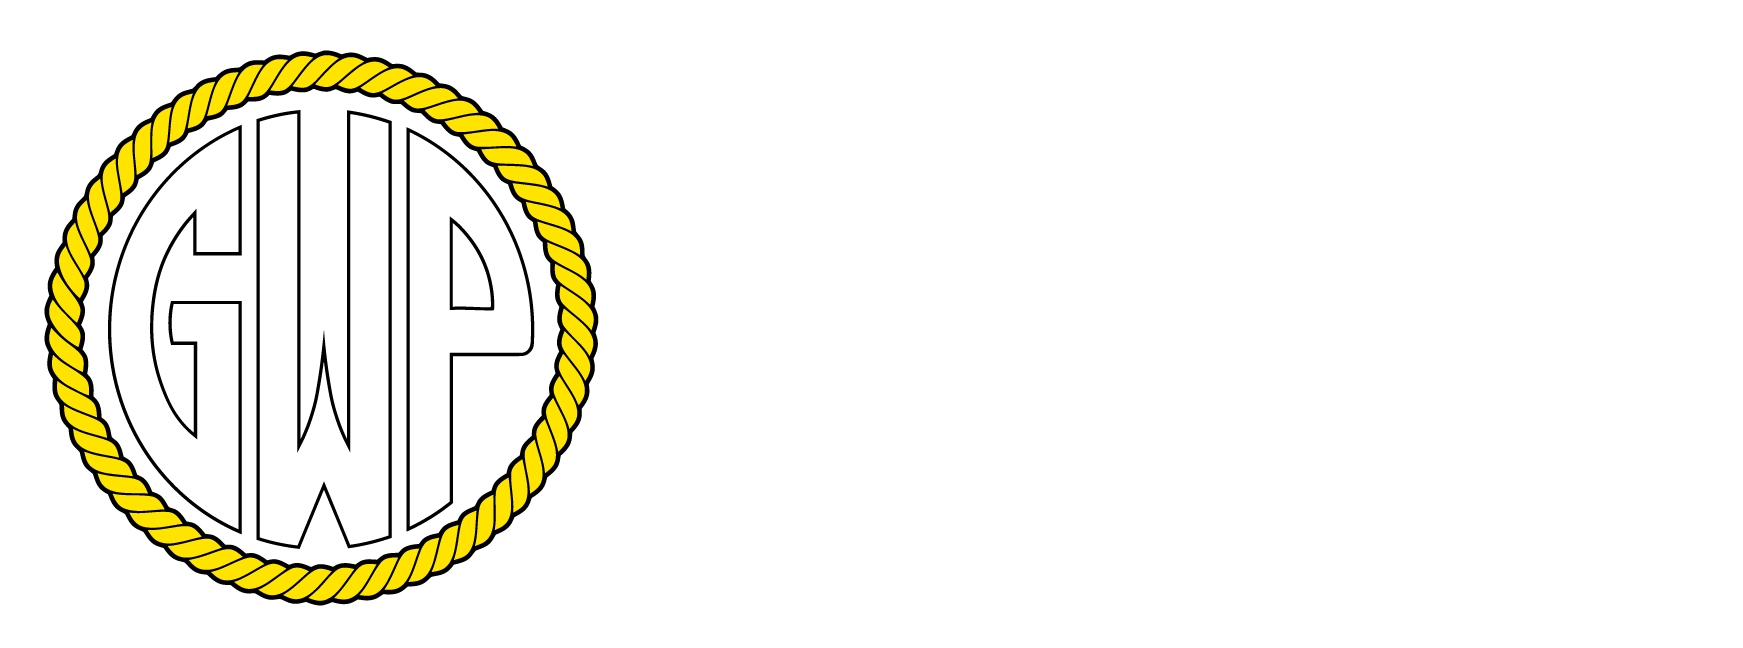 General Work Products